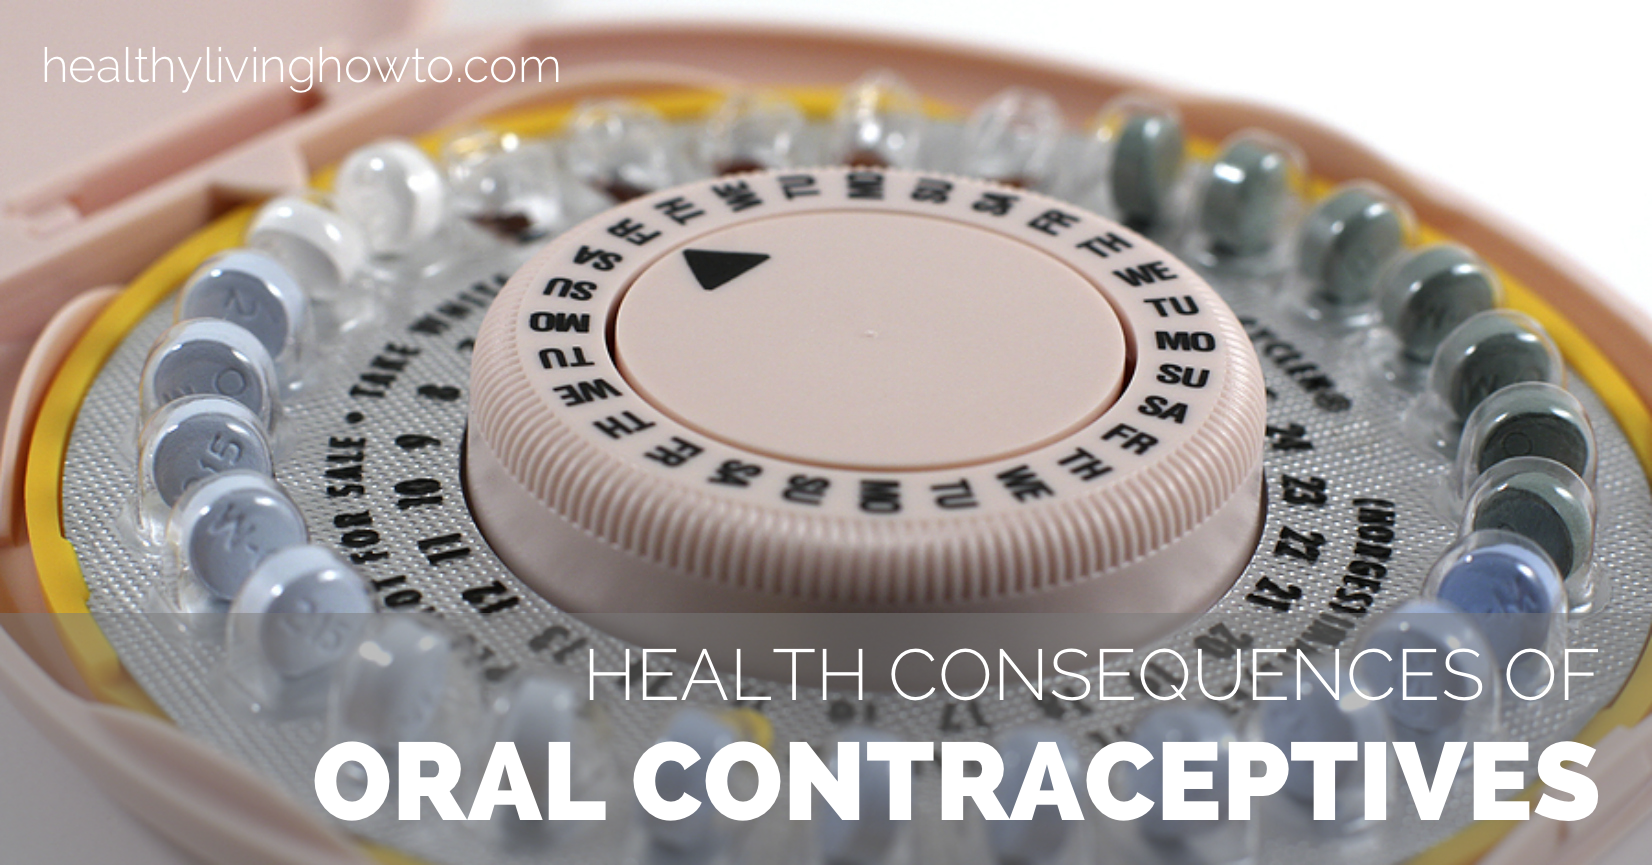 Health Consequences of Oral Contraceptives